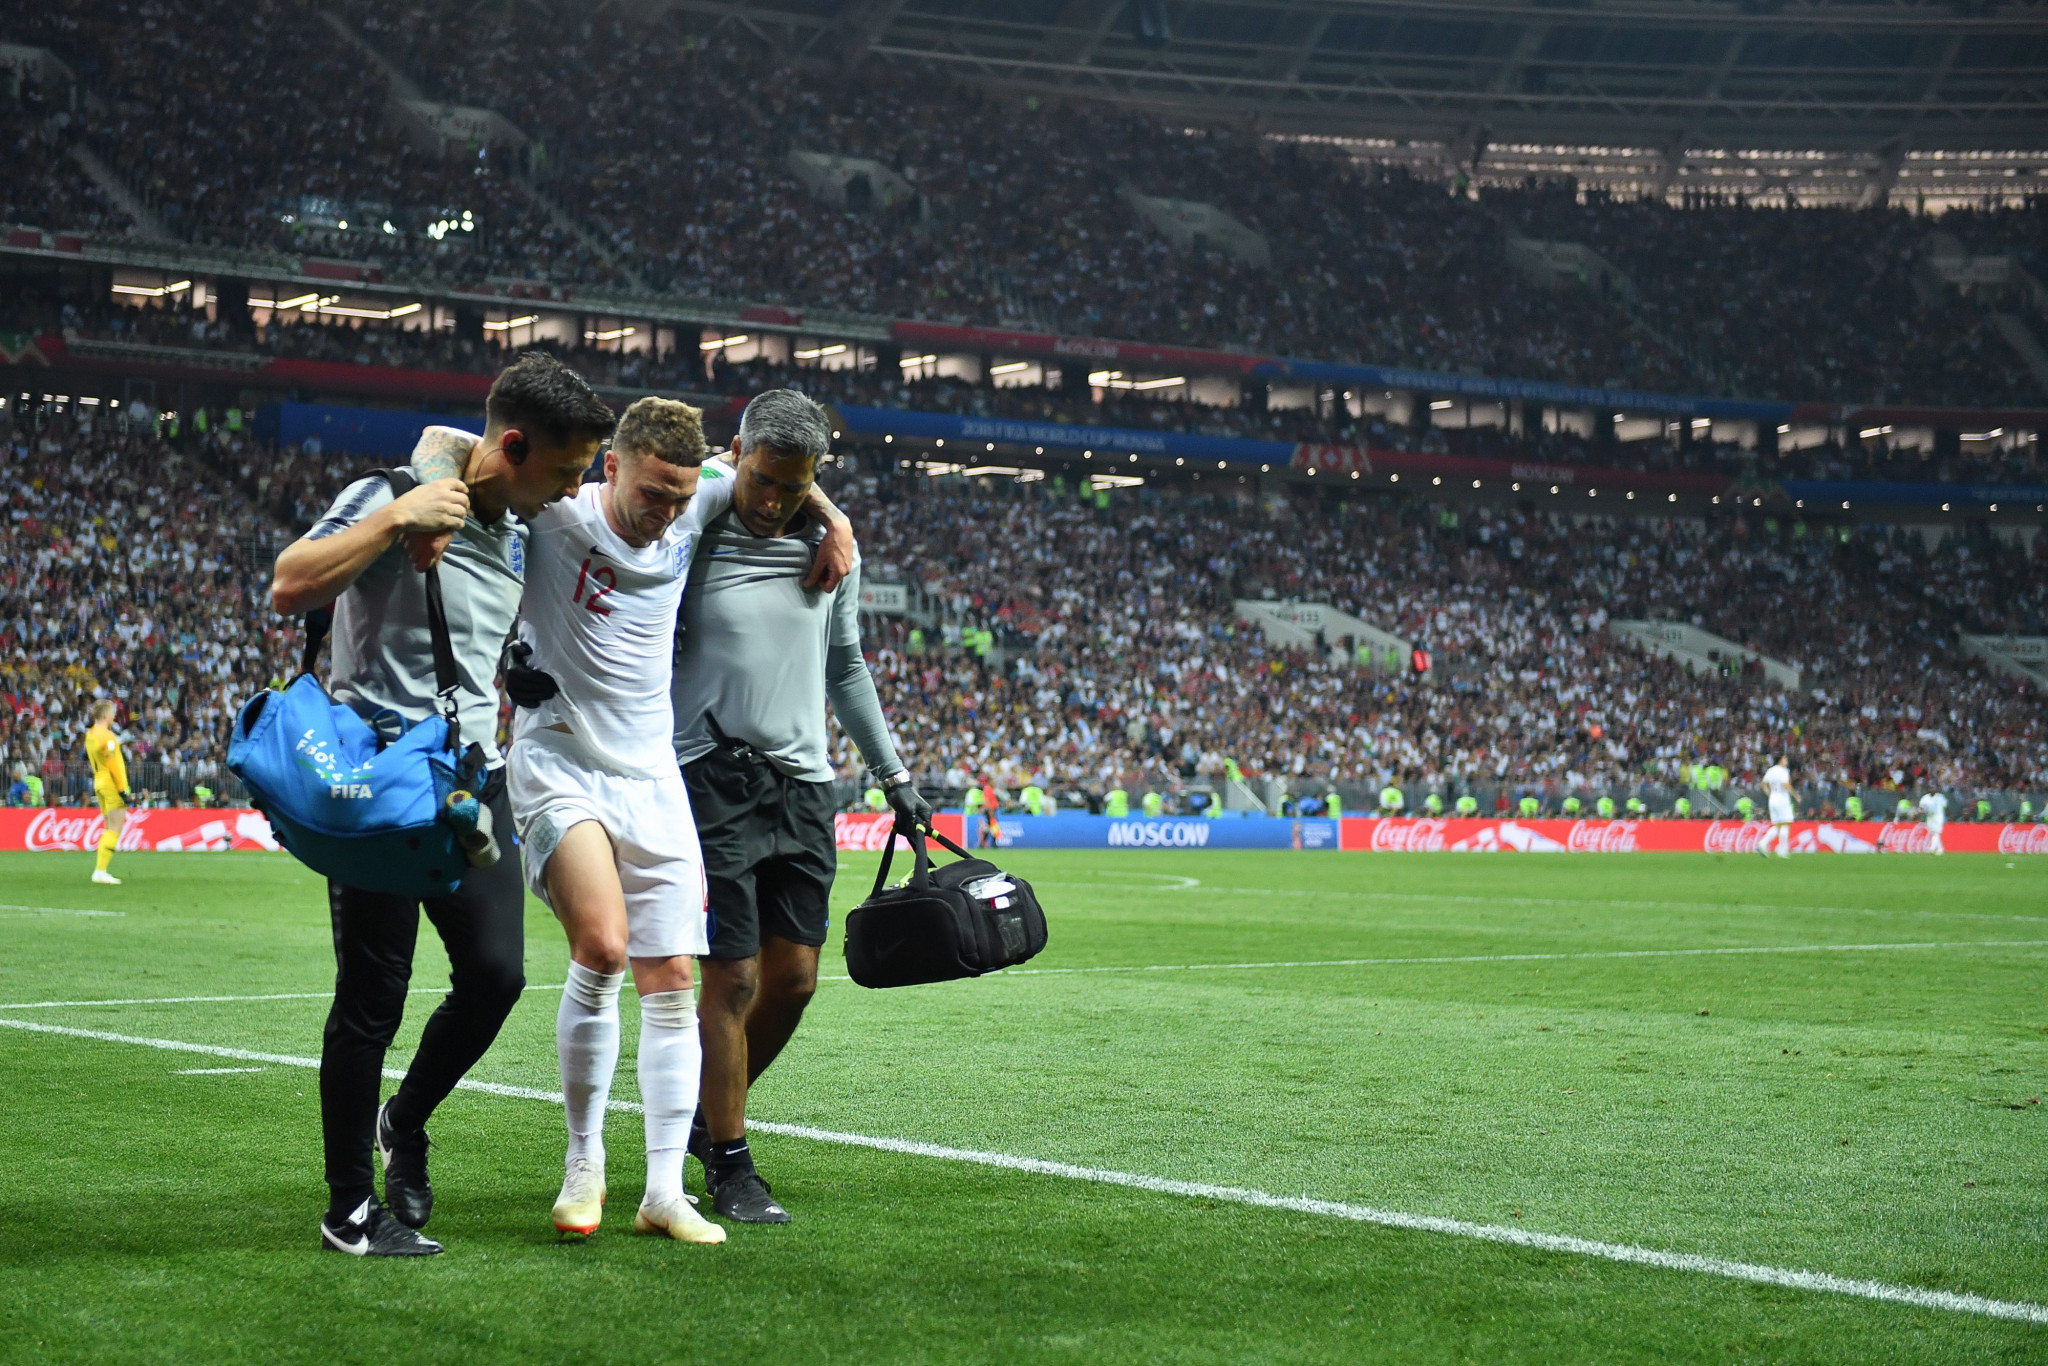 Kieran Trippier then hobbled off in extra time with a groin injury ©Getty Images